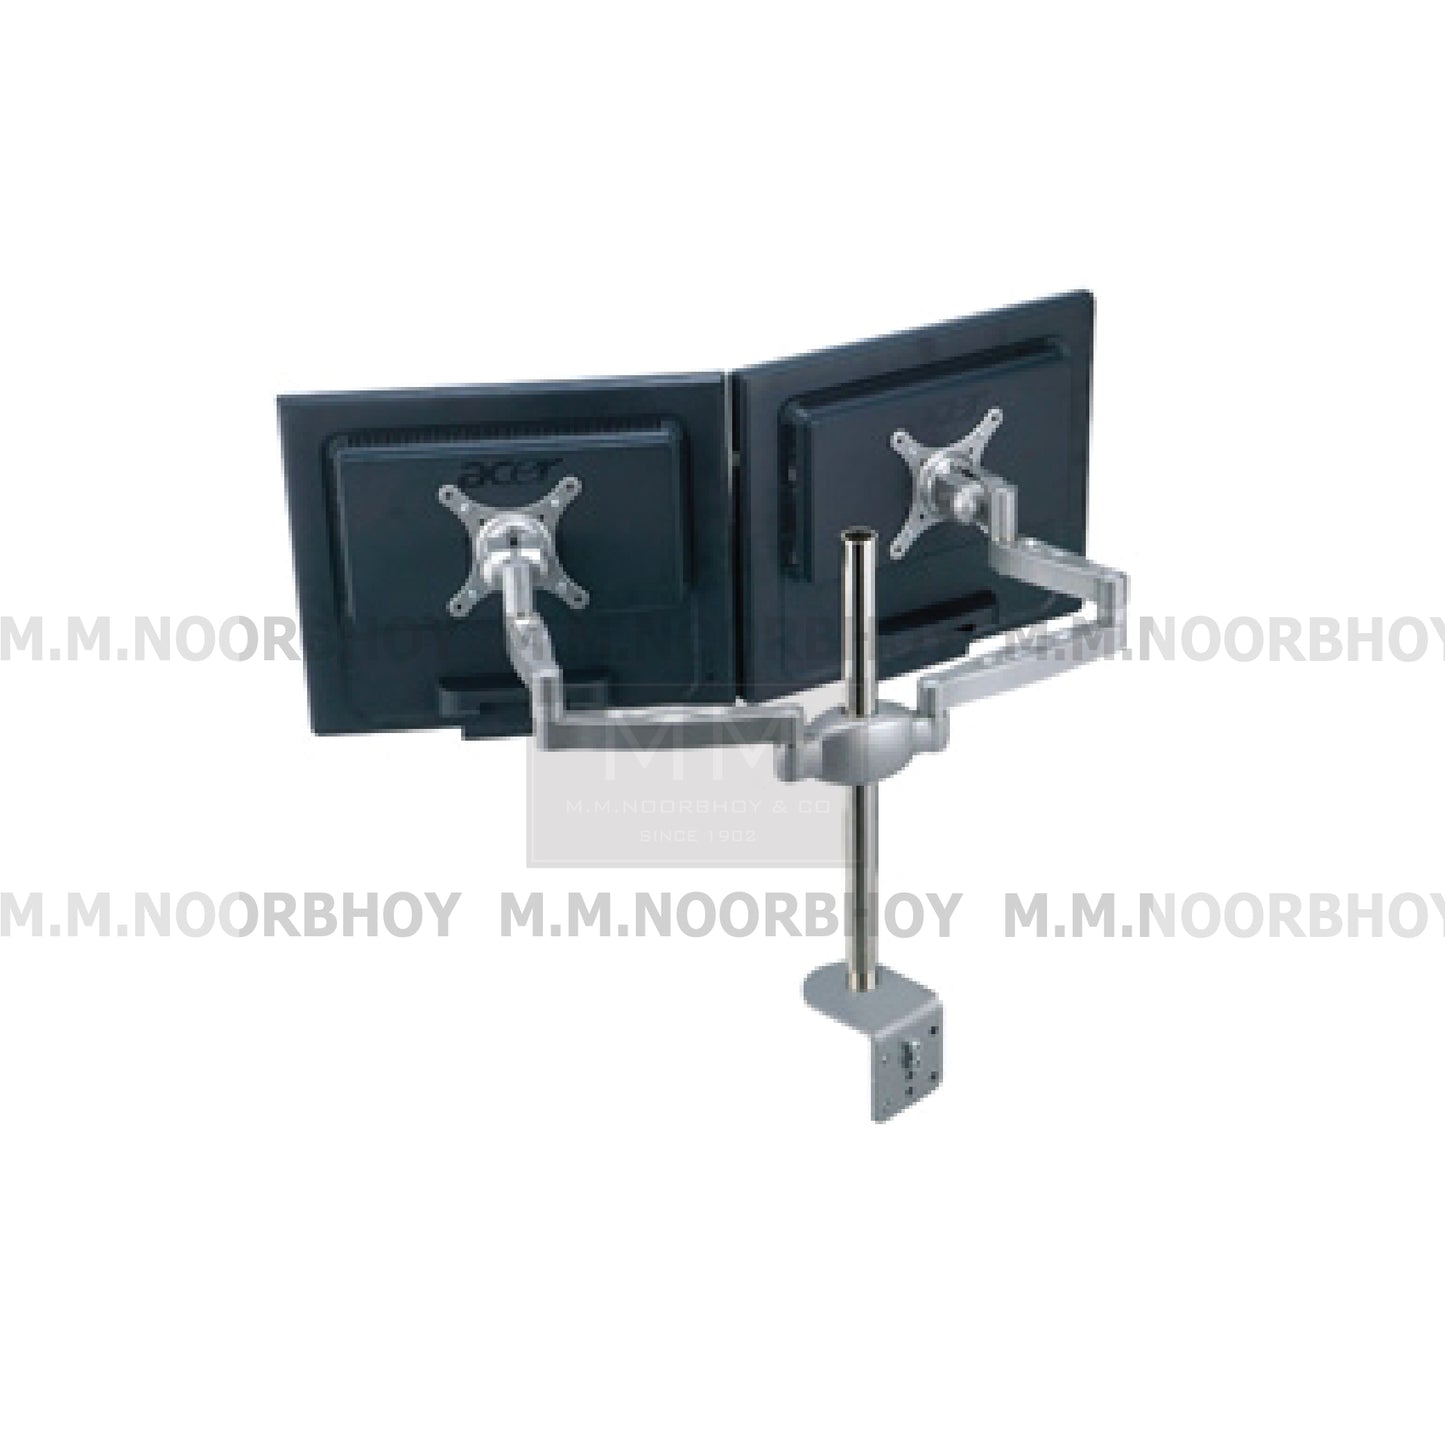 Mcoco LCD & LED Tv Bracket Desk Mount Up to 24 Inches Double Arm Silver Colour - LCD005.1